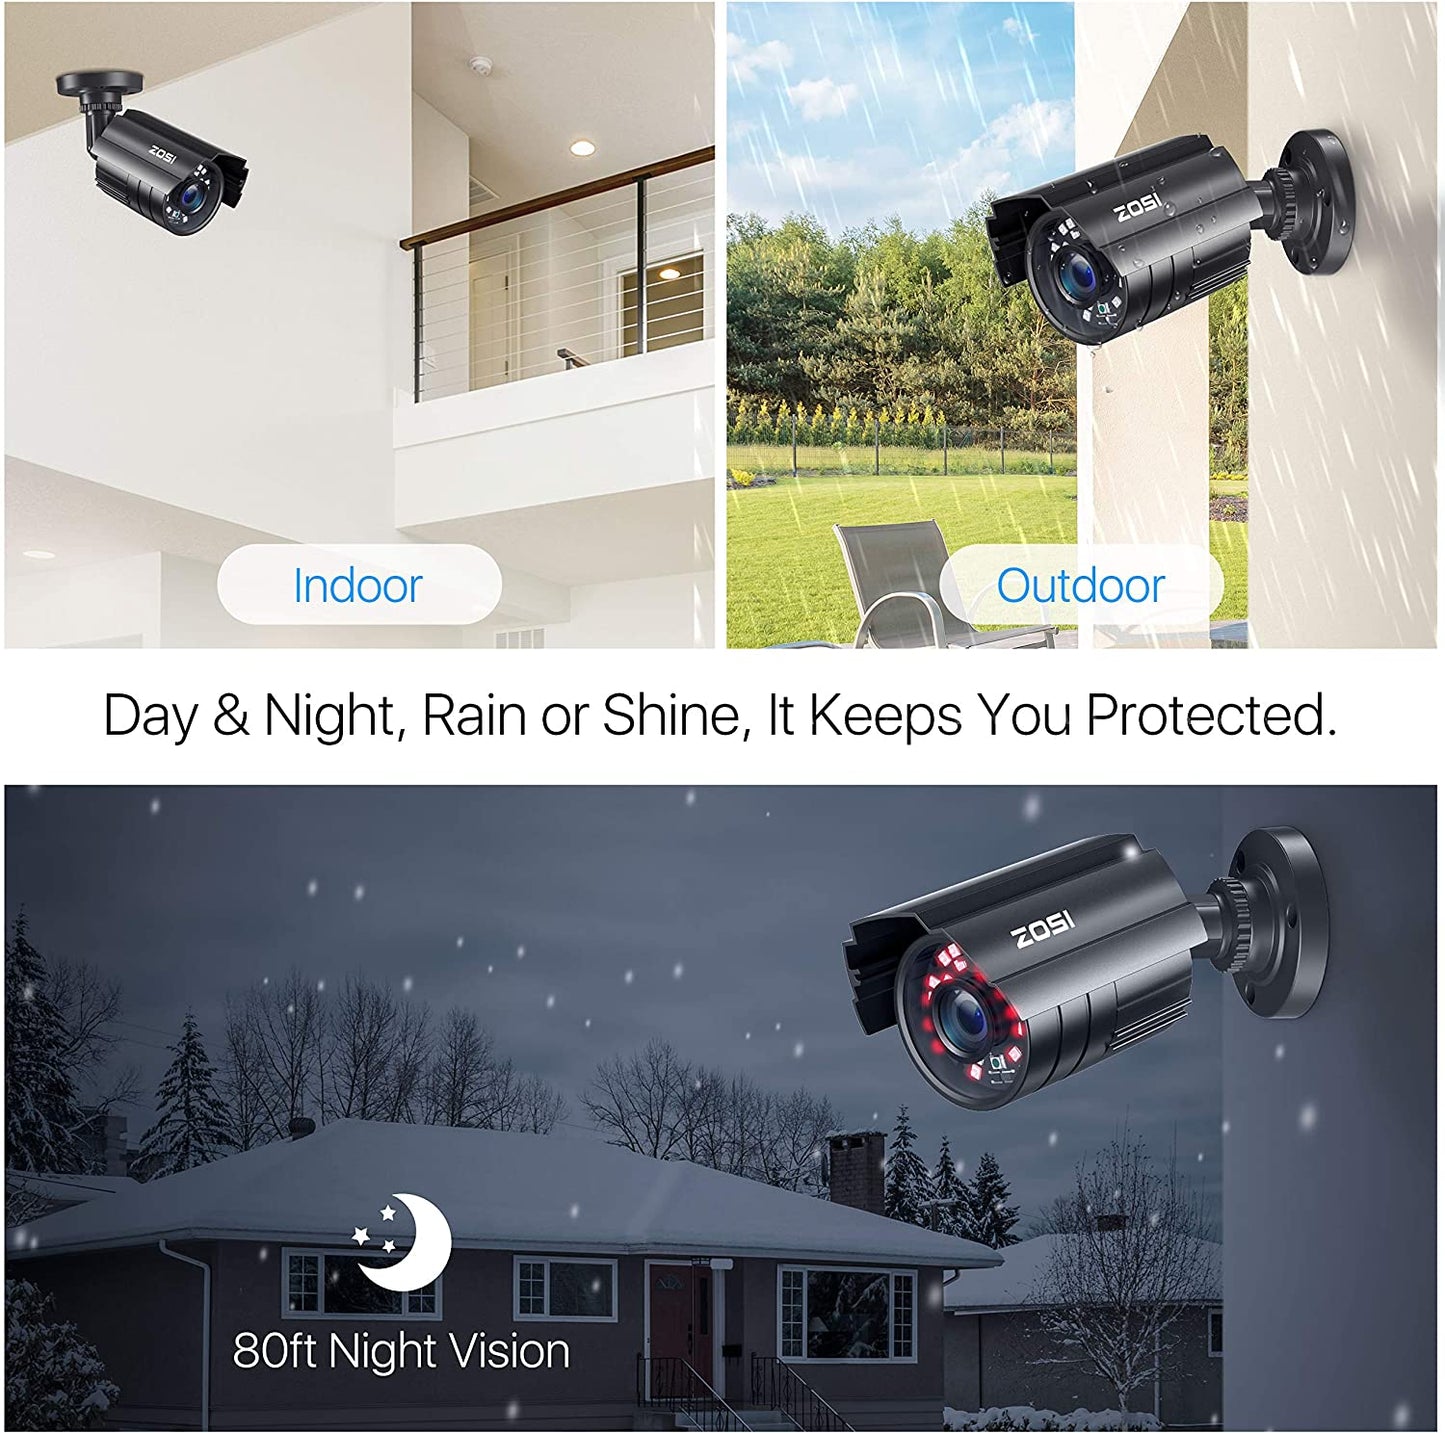 ZOSI SECURITY CAMERA SYSTEM - 8CH DVR & 4 CAMERAS 1080P FULL HD IP66 WATERPROOF | NIGHT VISION